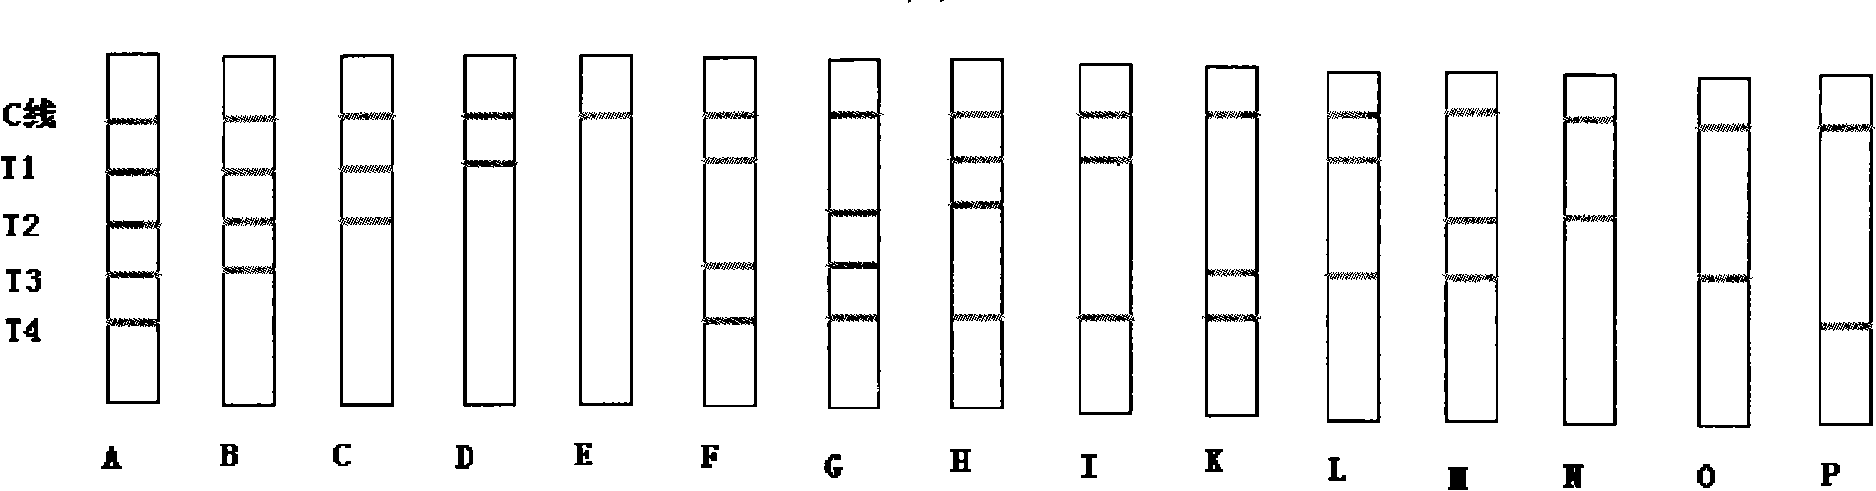 Colloidal gold immune chromatography test paper for detecting biotoxin and detecting method thereof